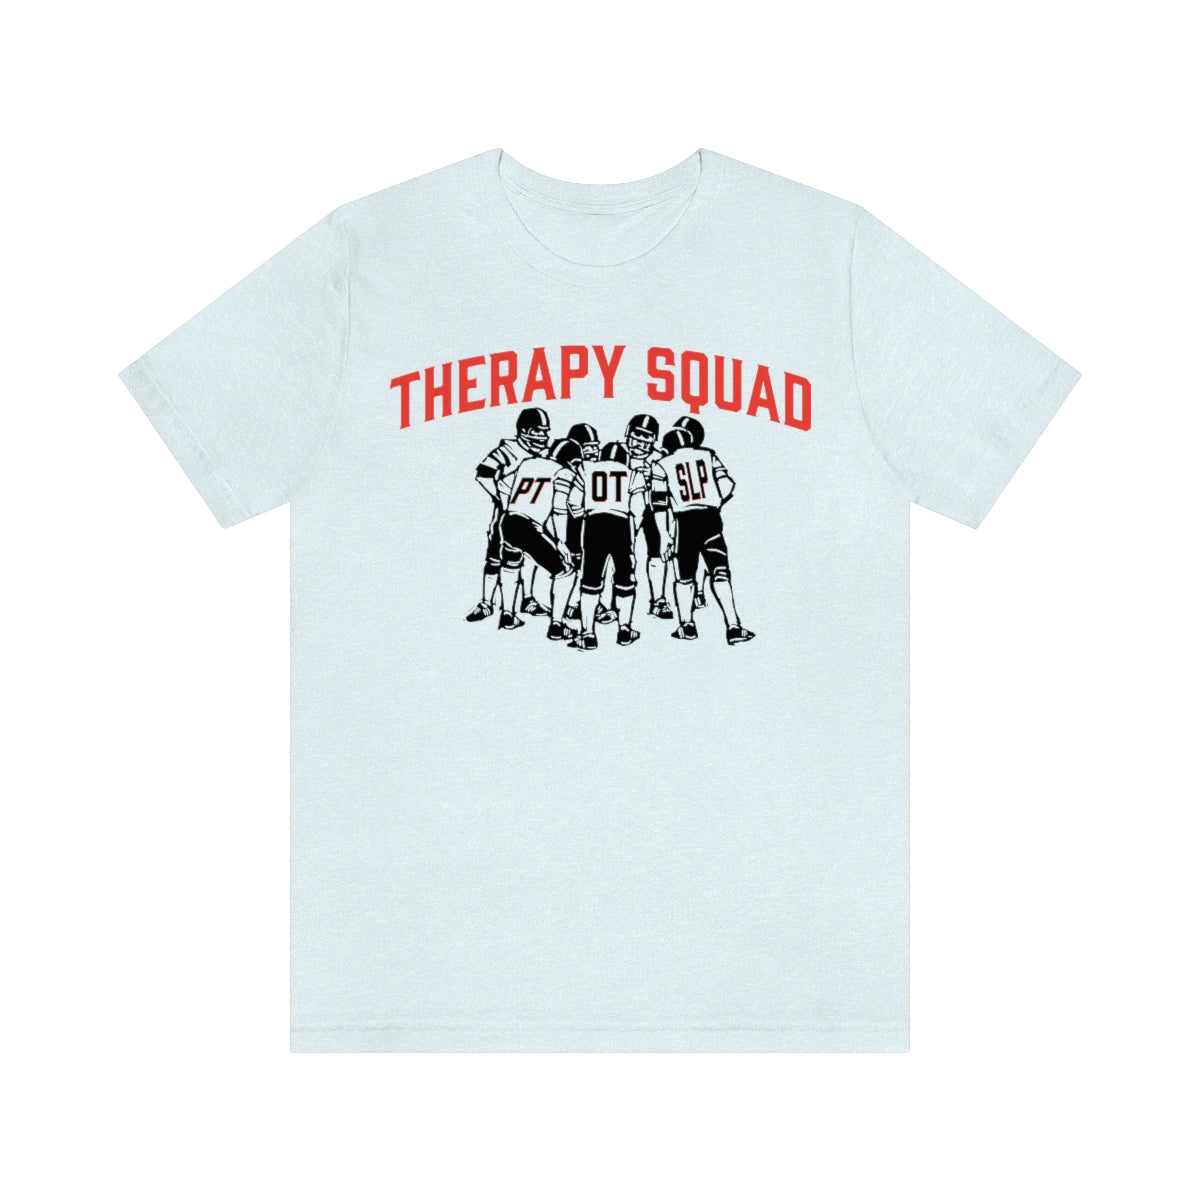 Therapy Team Shirt, Physical Therapist Shirt, Occupational Therapist Shirt, Rehab Squad Shirt, Rehab Team Shirt, Therapy Week Shirt, OT Tee